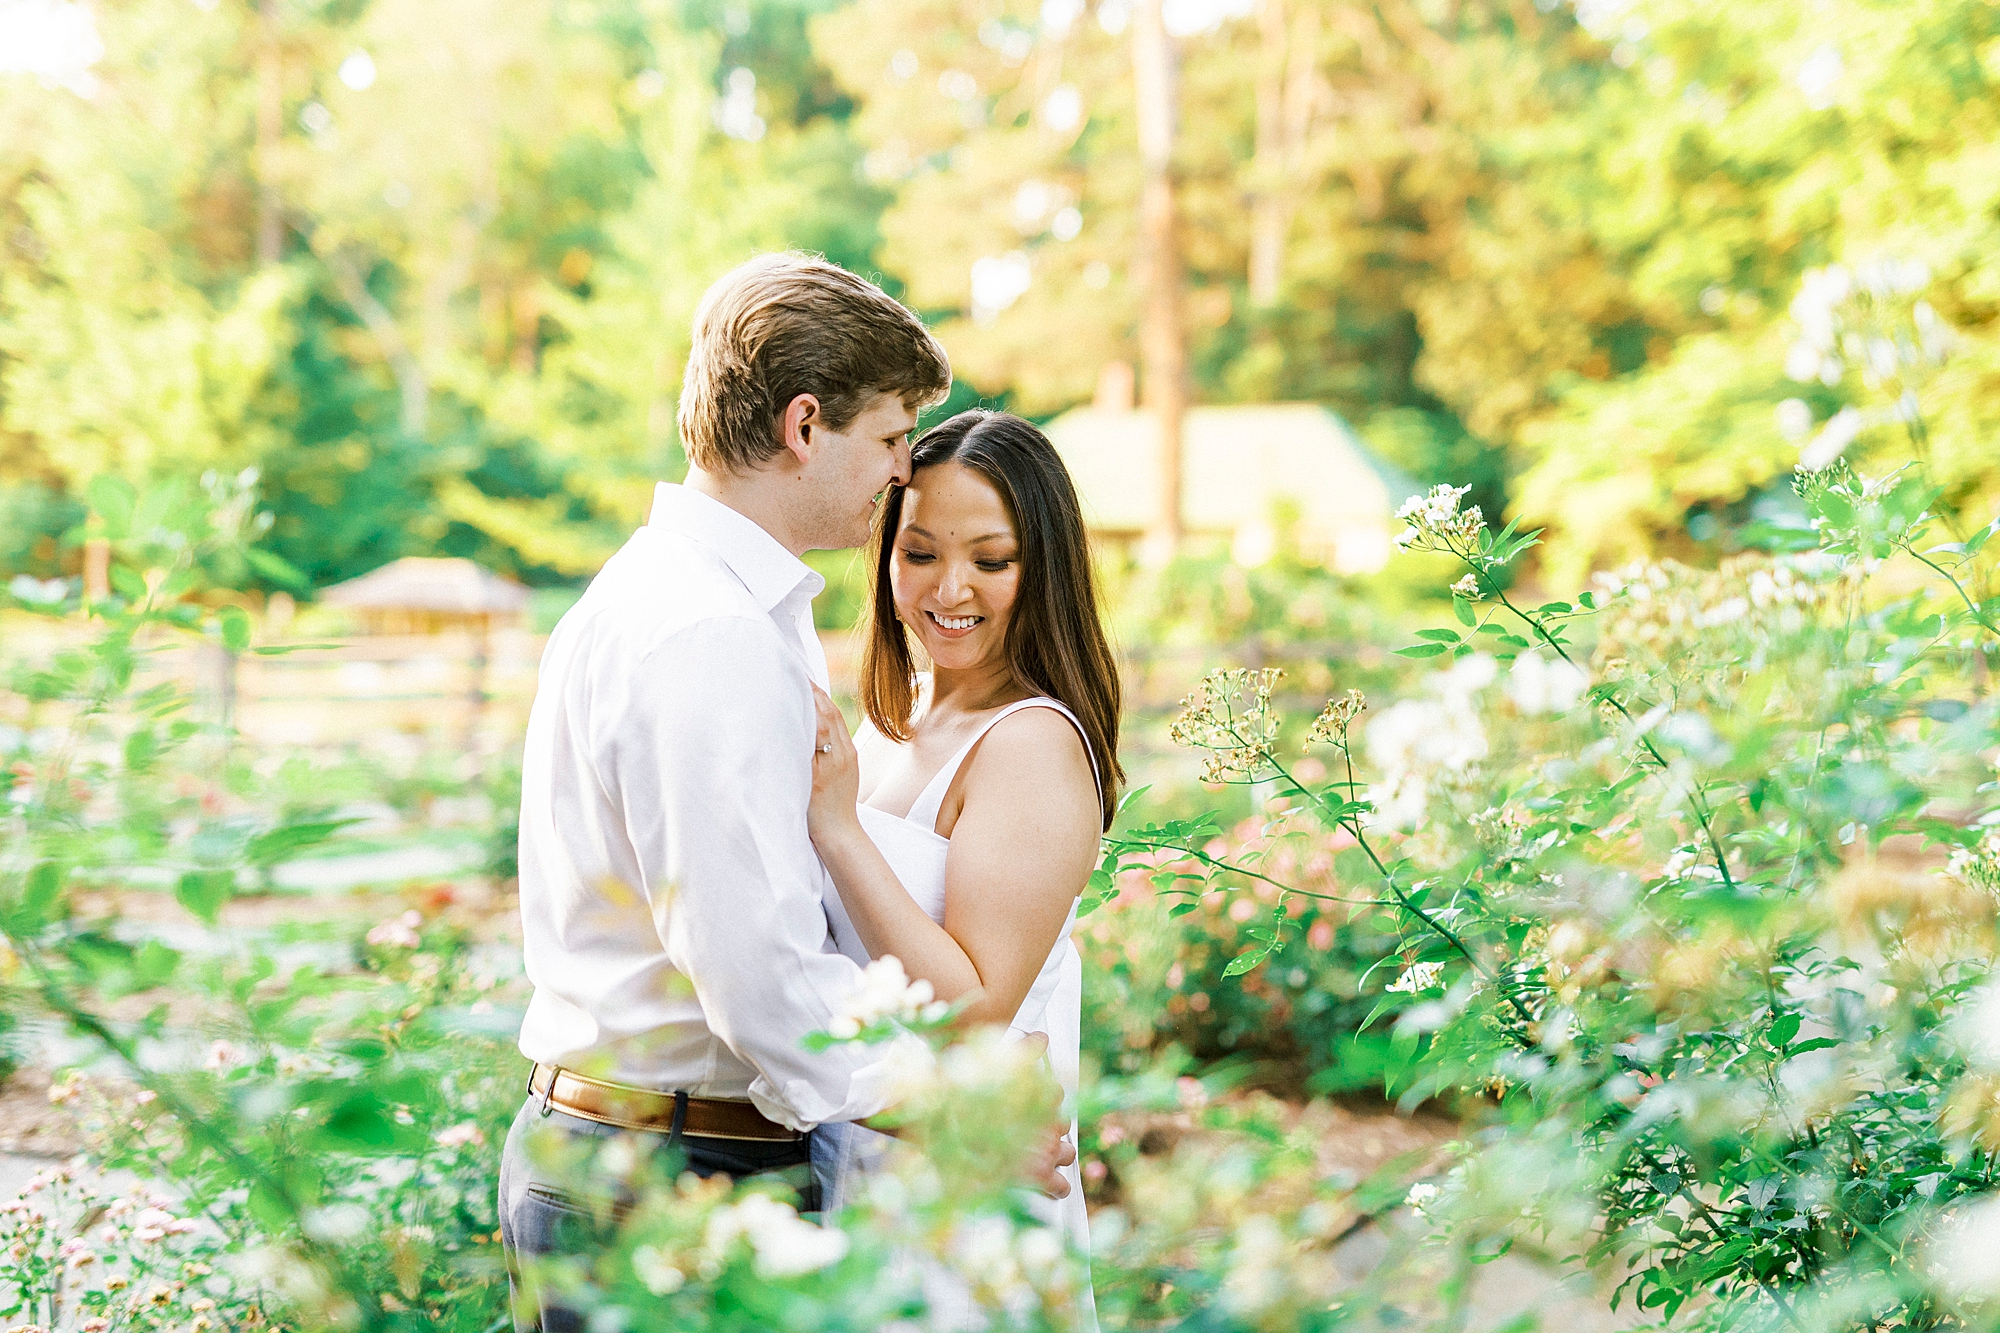 groom leans to kiss bride's forehead standing in gardens at Reynolda Gardens